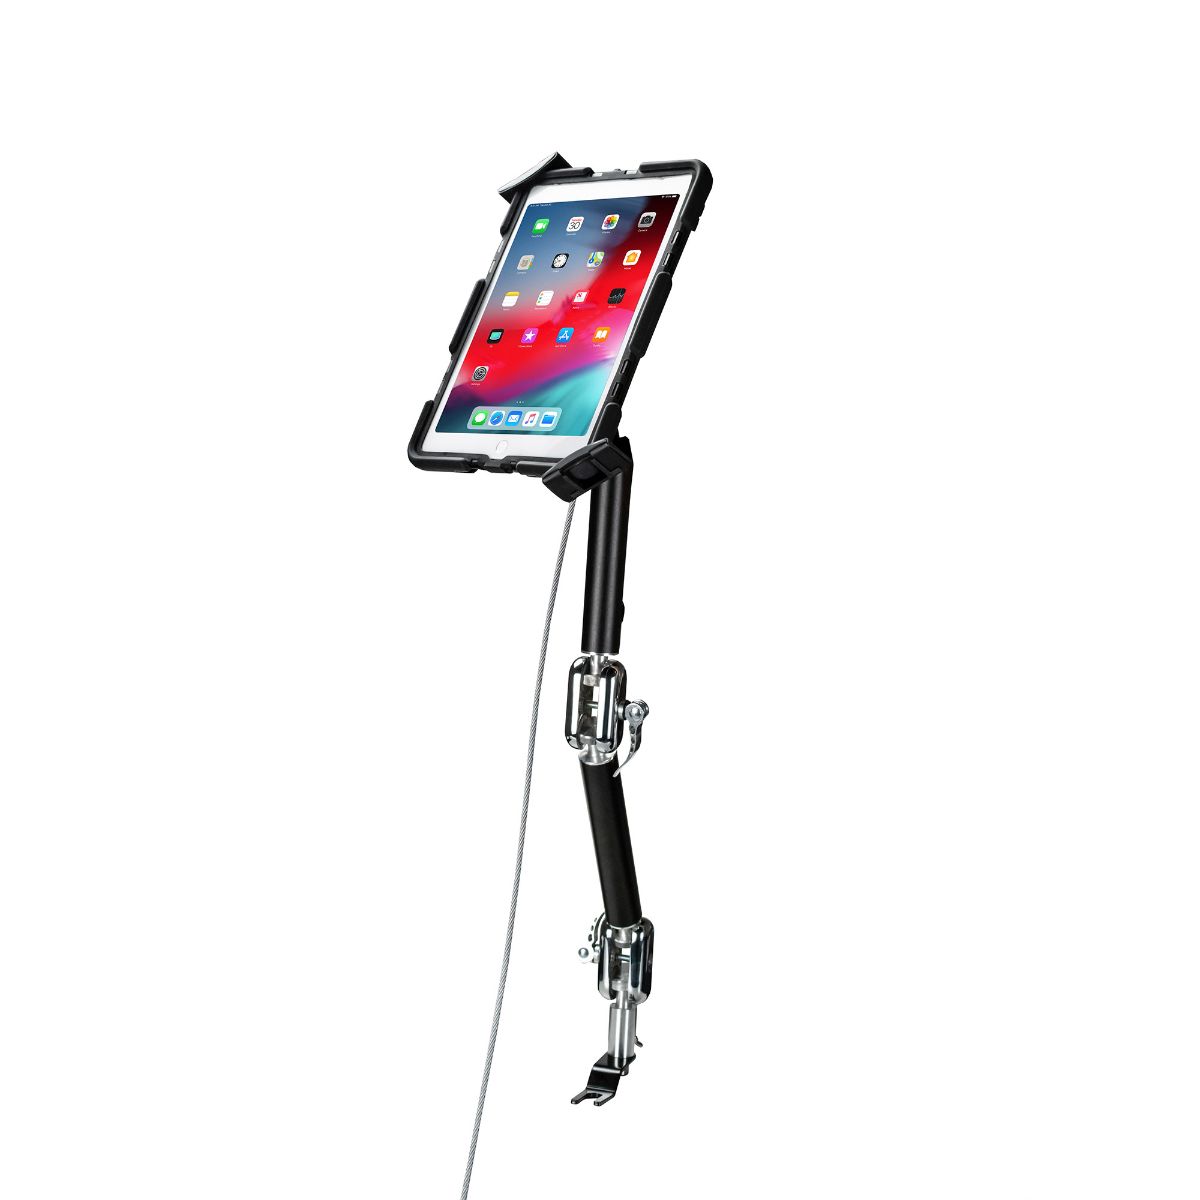 Multi-Flex Quick Release Security Car Mount for 7 - 14 inch Tablets